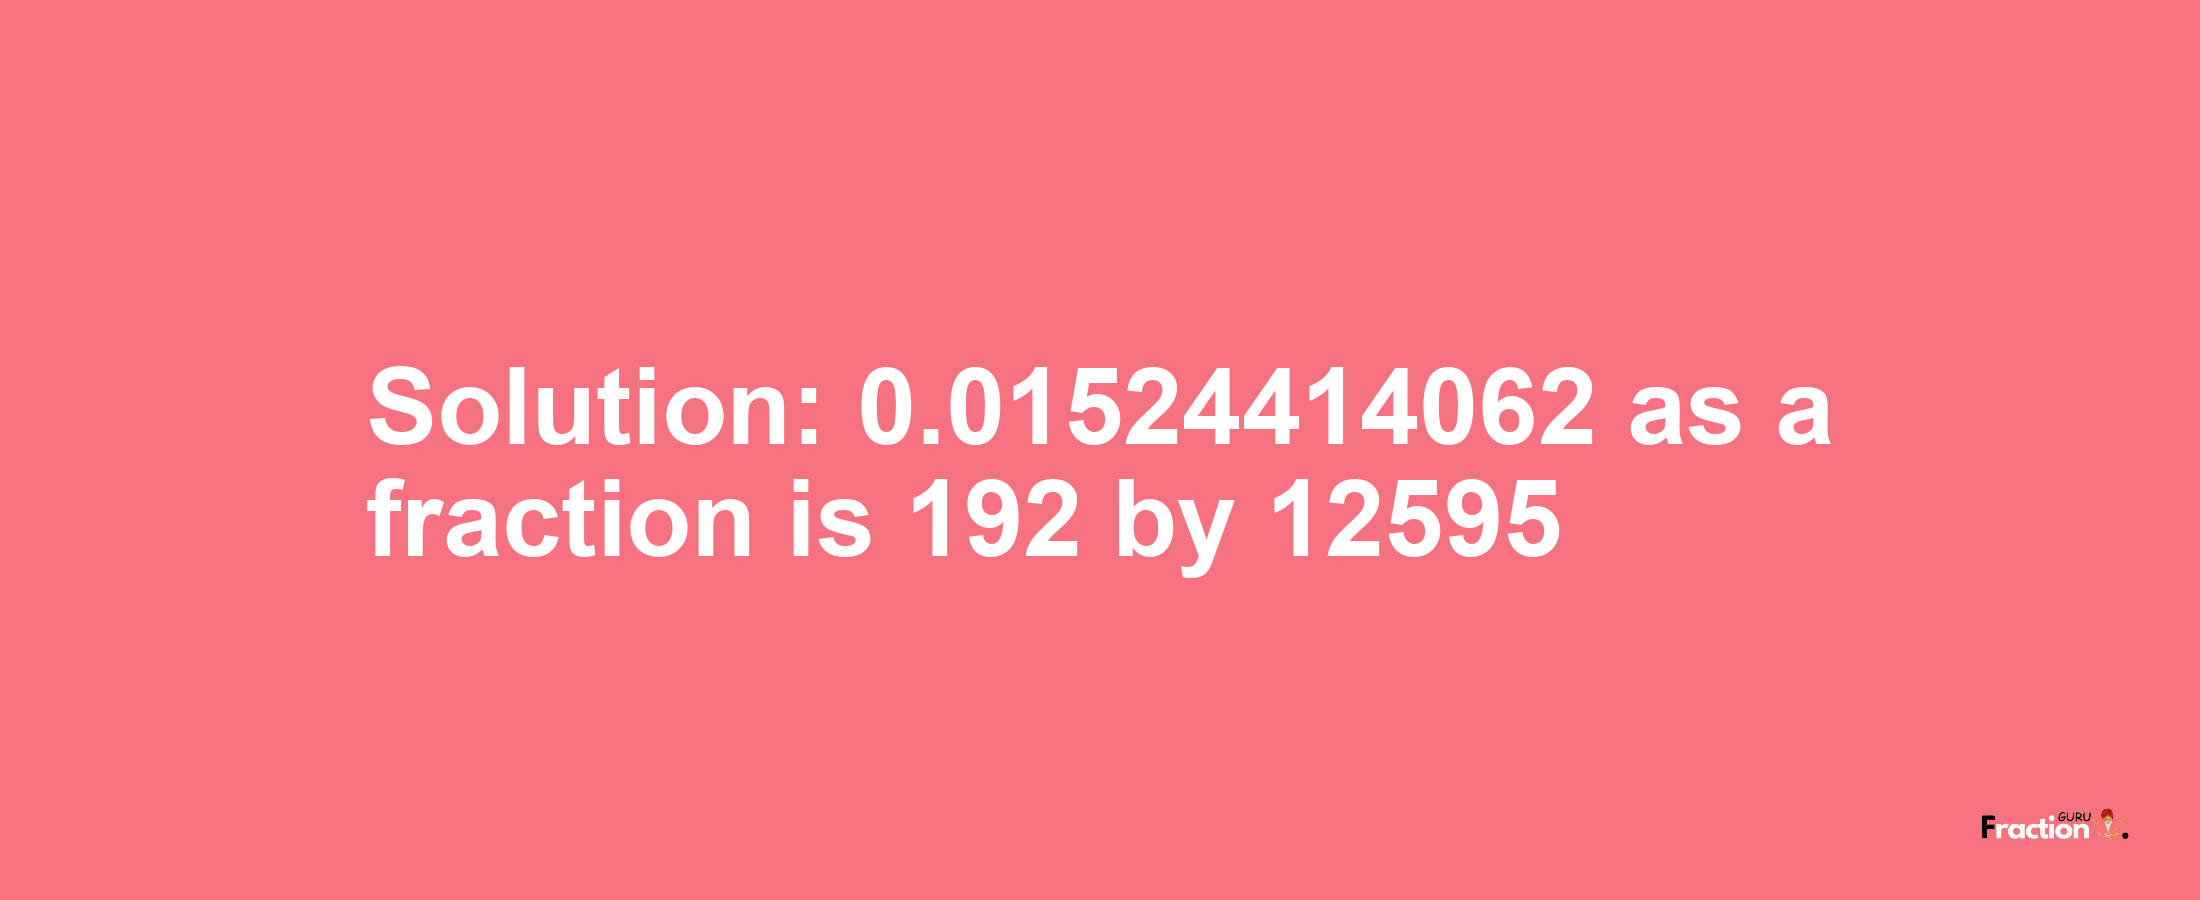 Solution:0.01524414062 as a fraction is 192/12595